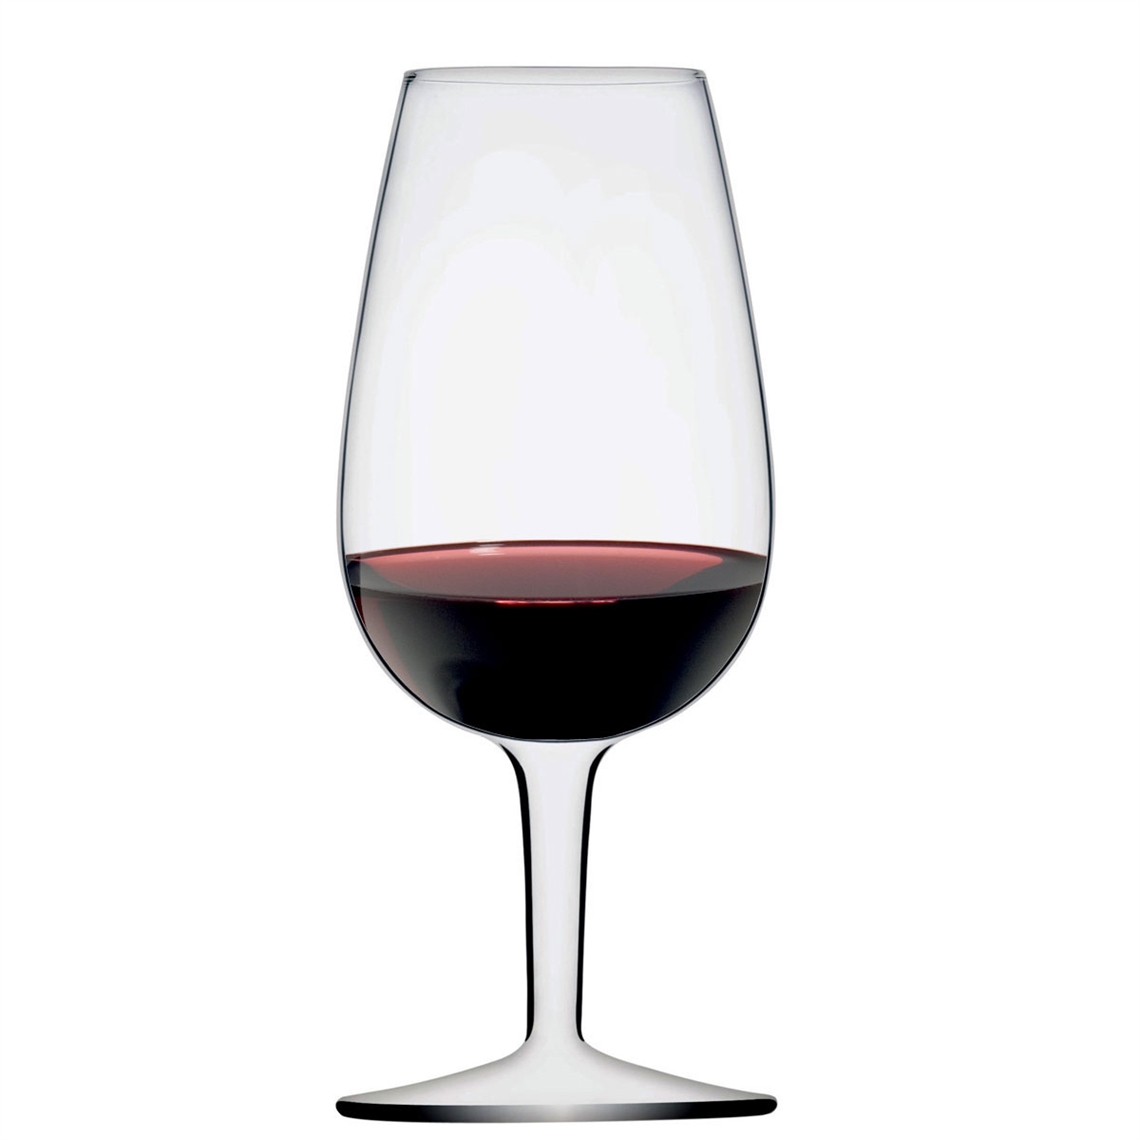 View more wine glasses by region and grape from our Wine Tasting Glasses range